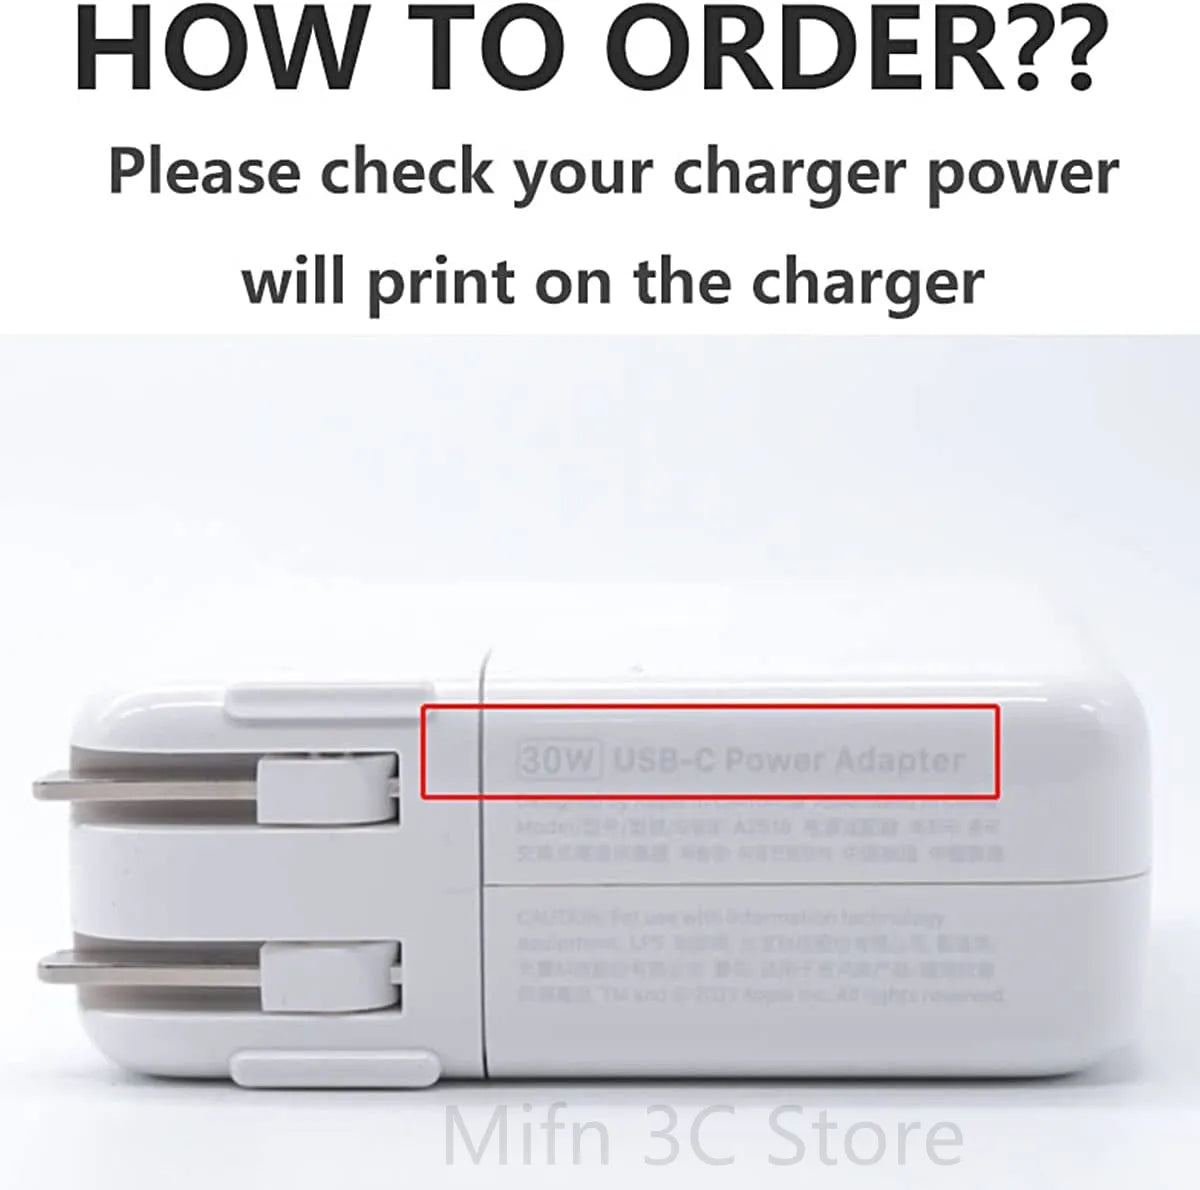 MacBook Pro Charger Silicone Protective Cover - Various Models and Wattages  ourlum.com   